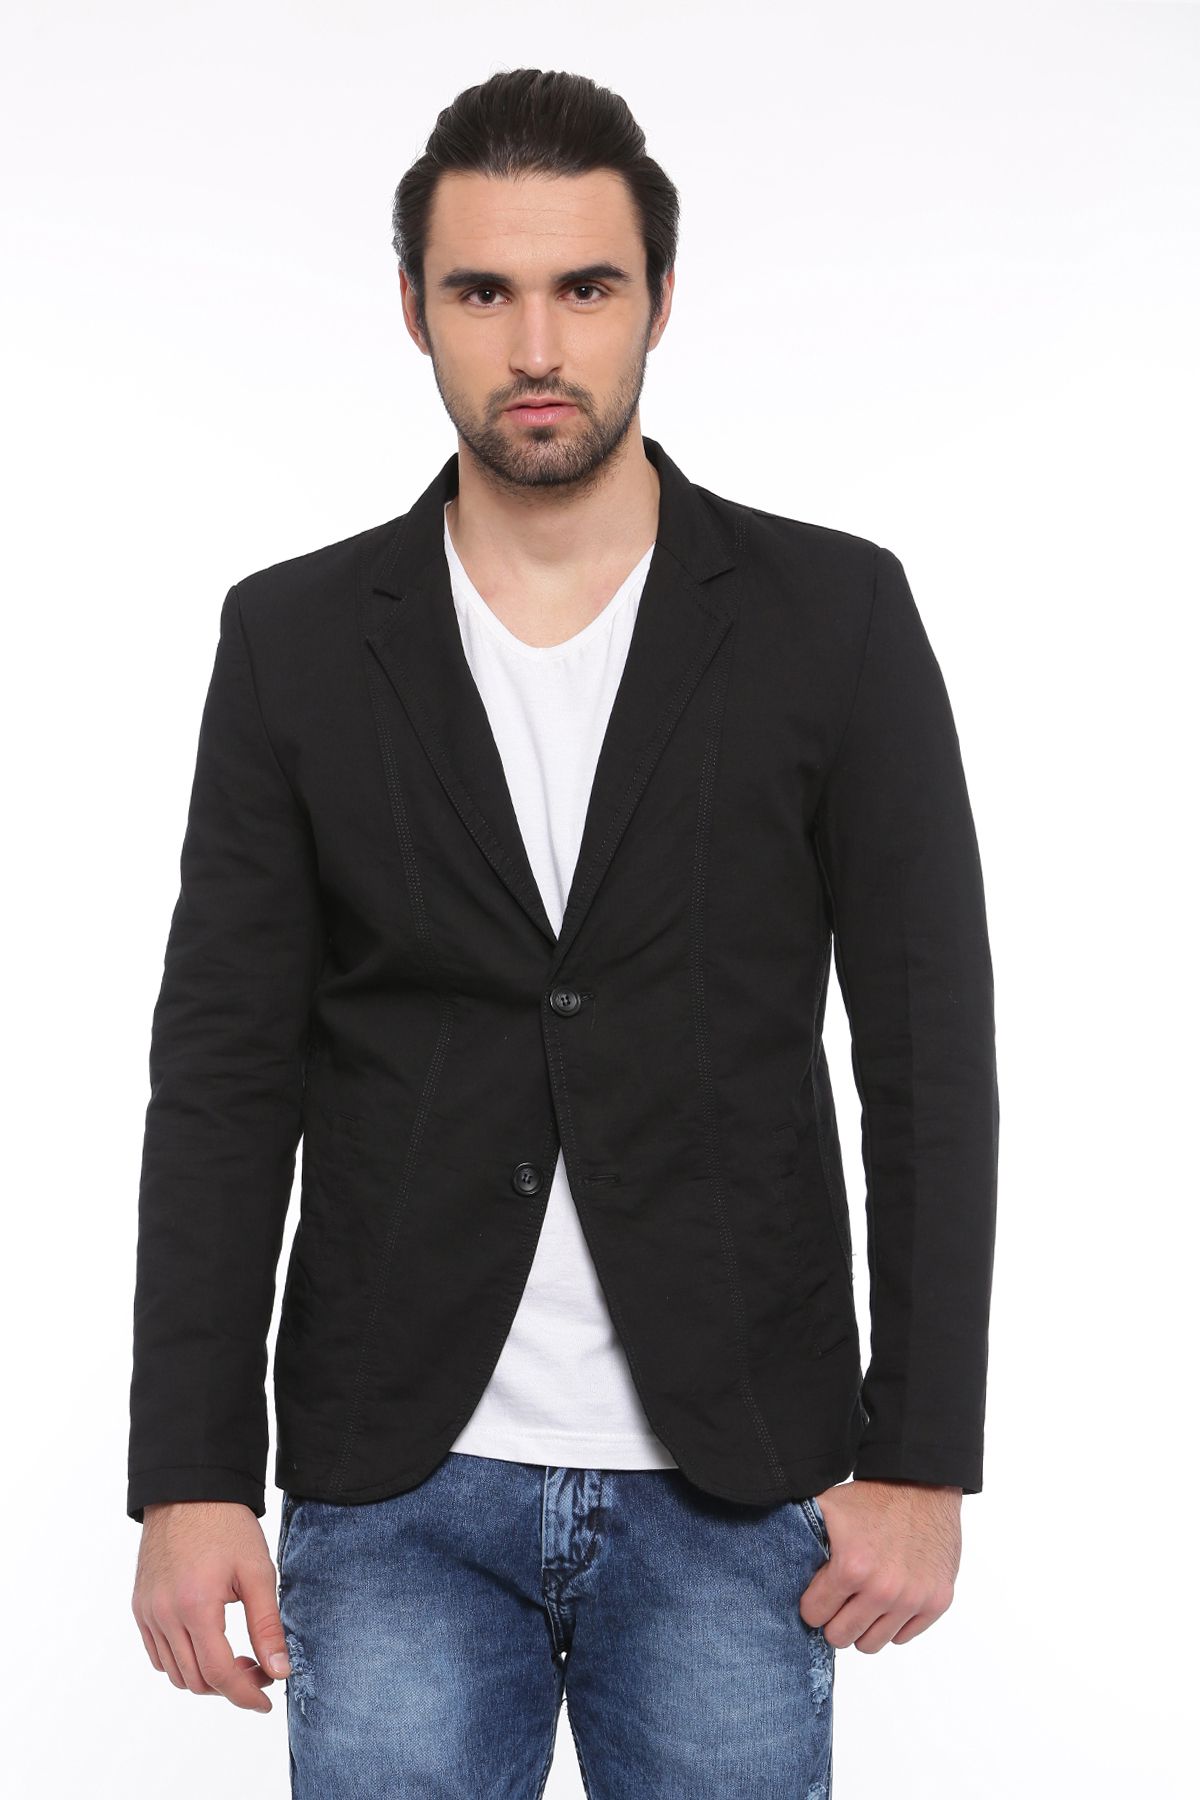 SHOWOFF Black Solid Casual Blazers - Buy SHOWOFF Black Solid Casual ...